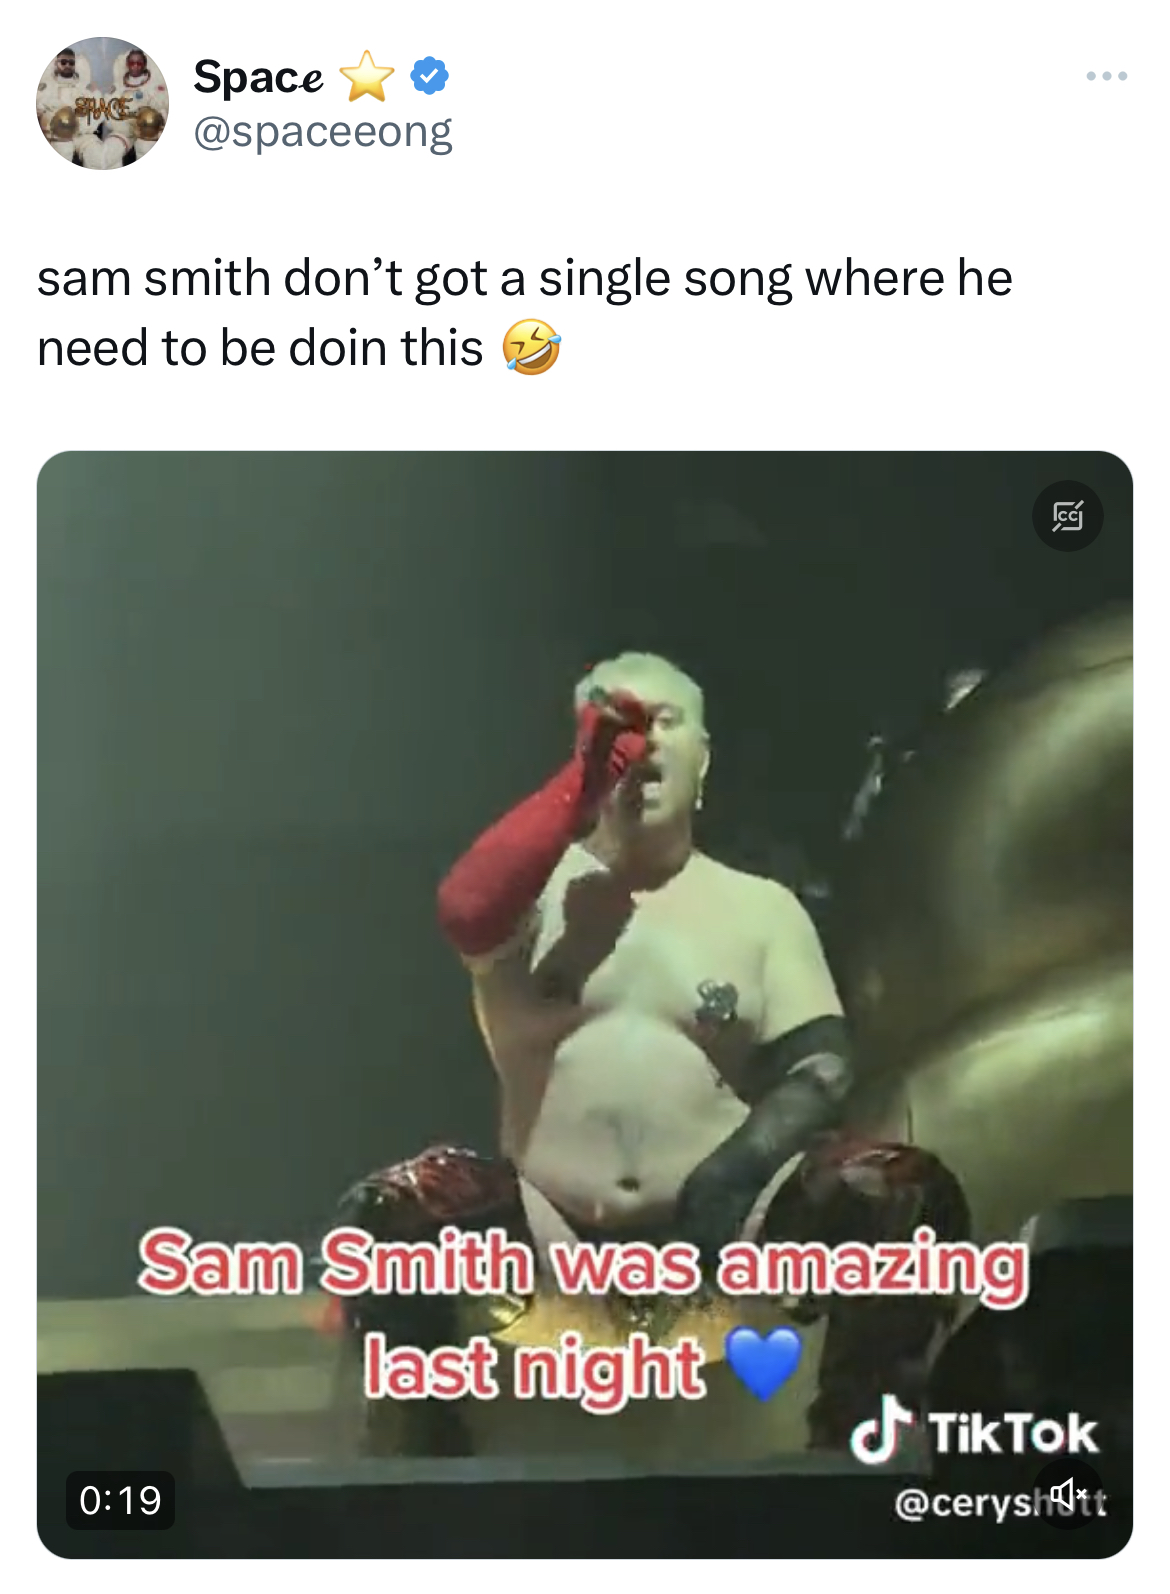 Don't have a single song where they need to do this - photo caption - Space sam smith don't got a single song where he need to be doin this Sam Smith was amazing last night 190 TikTok